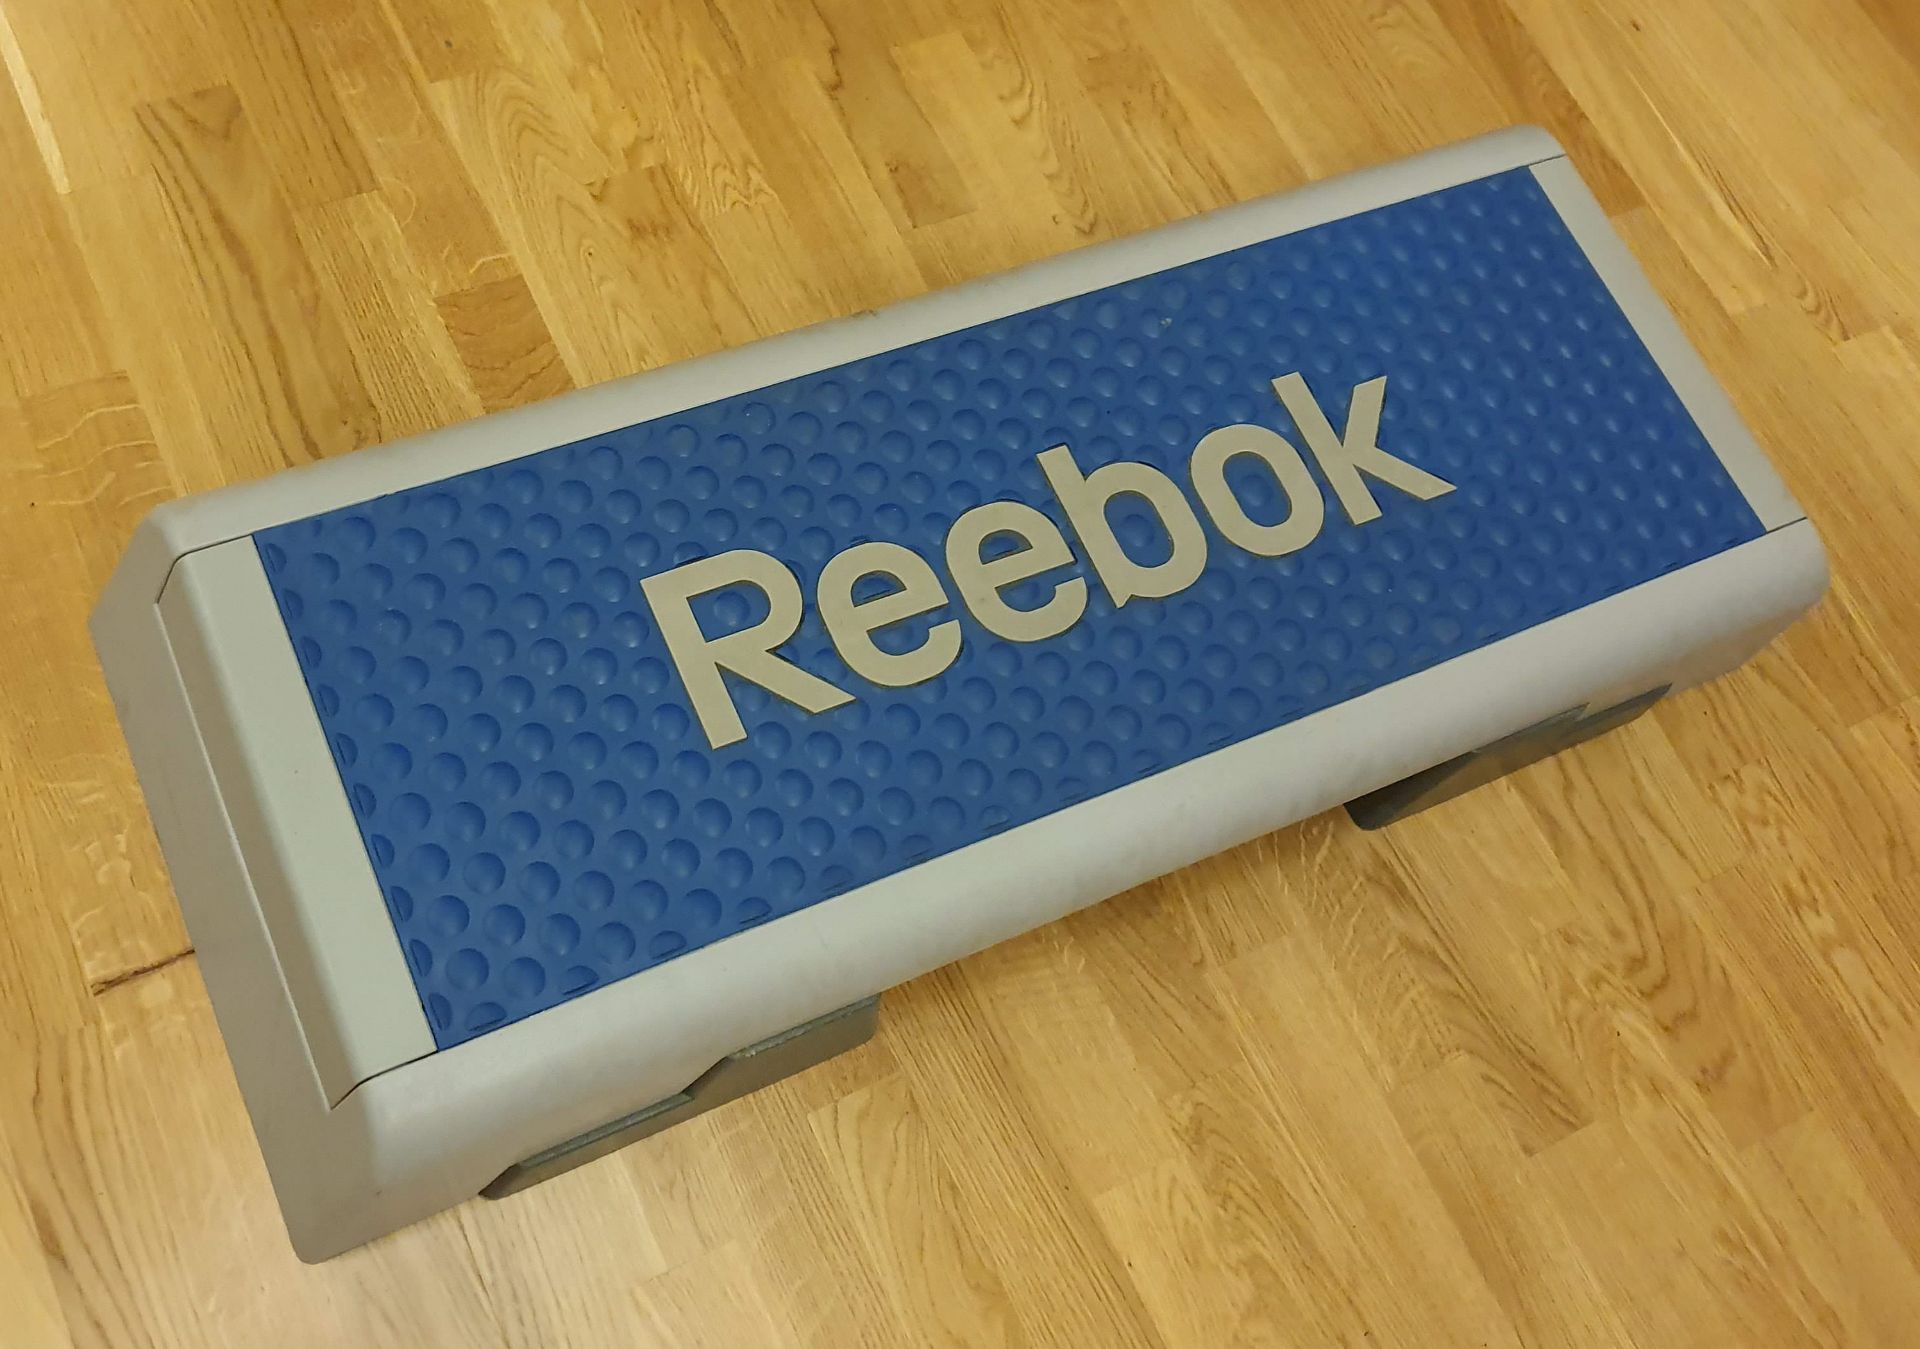 1 x Reebok Excercise Stepper - CL552 - Location: West Yorkshire - Image 2 of 2